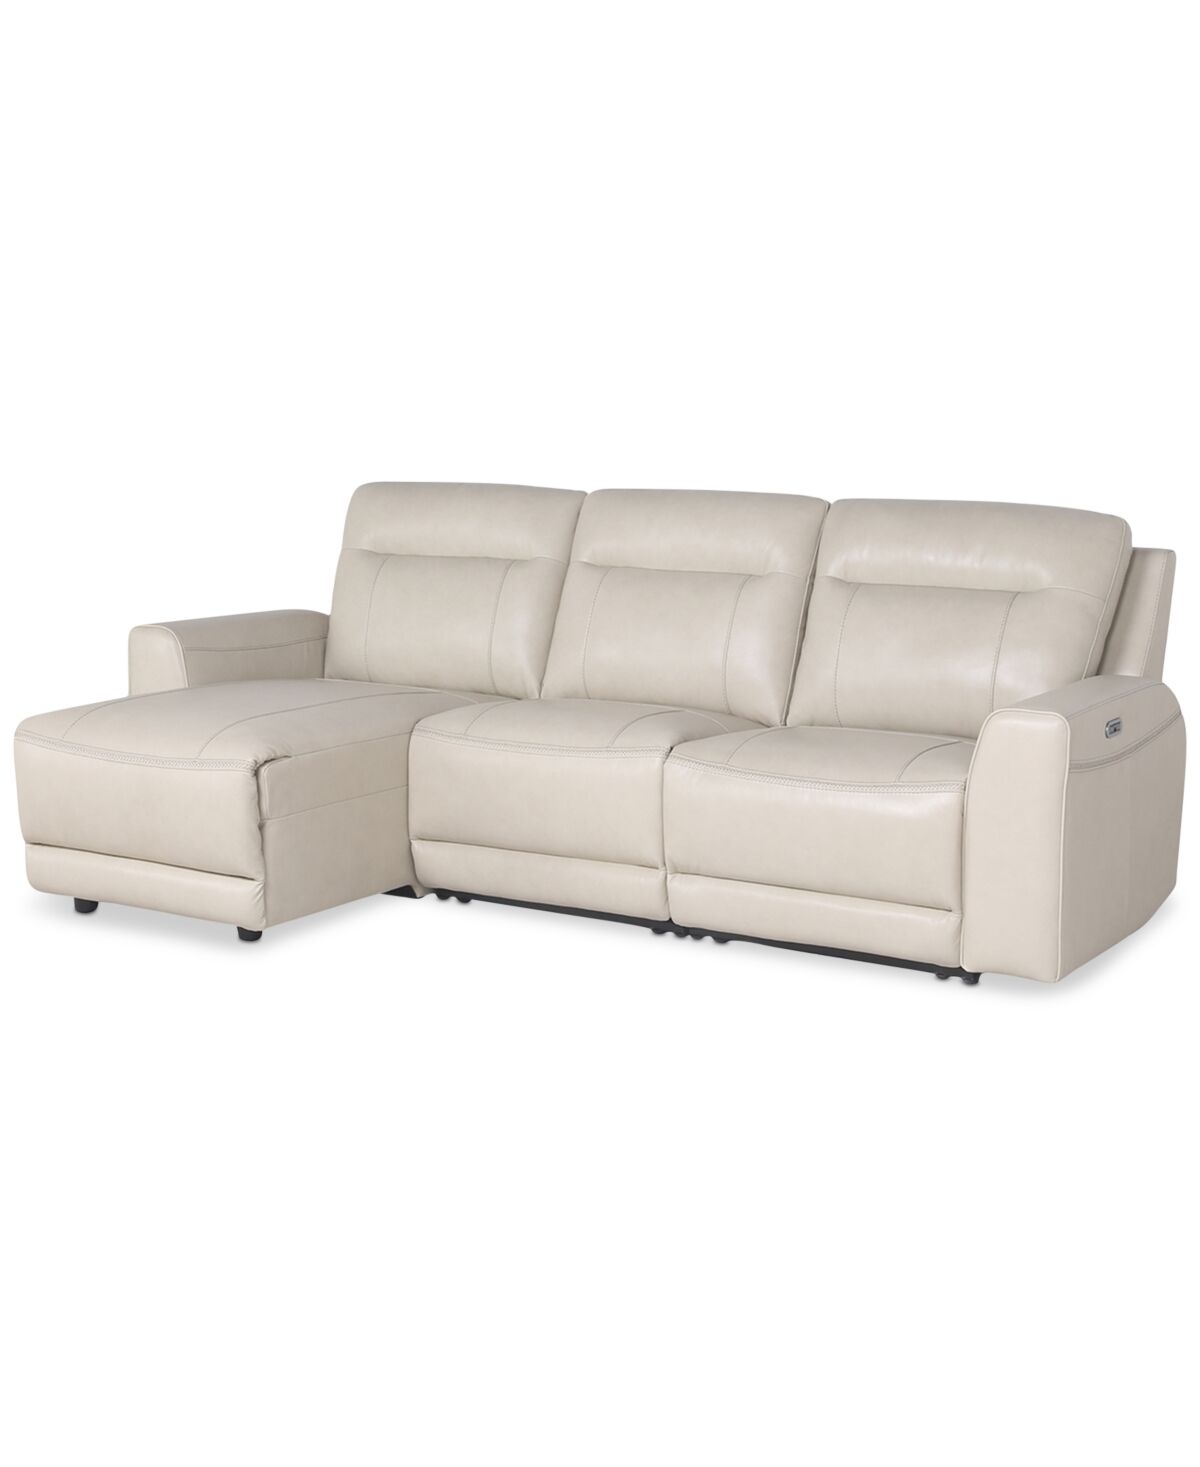 Macy's Closeout! Blairemoore 3-Pc. Leather Sofa with Power Chaise and 2 Power Recliners, Created for Macy's - Ice